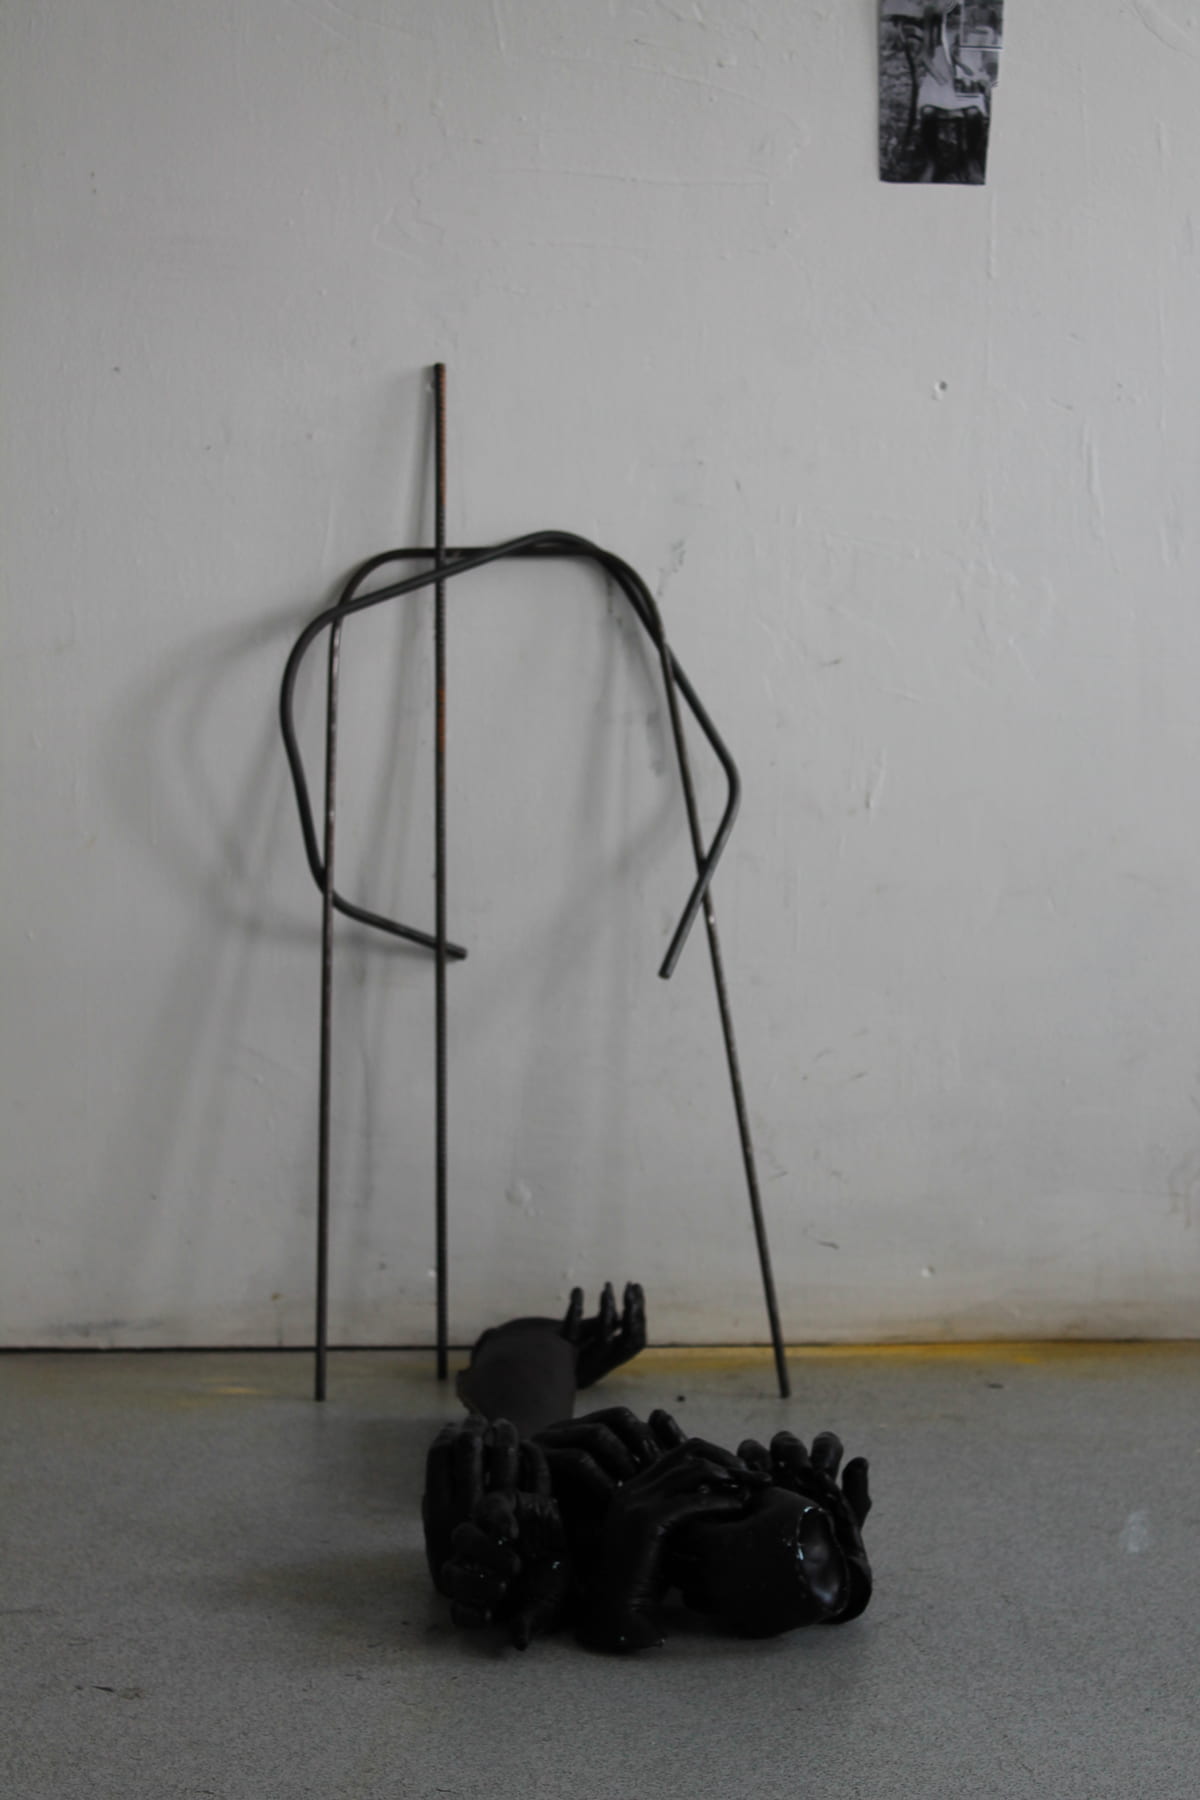 An abstracted figure made of metal rebar is leant against a wall, next to a pile of black, wax-cast hands hands on the floor.